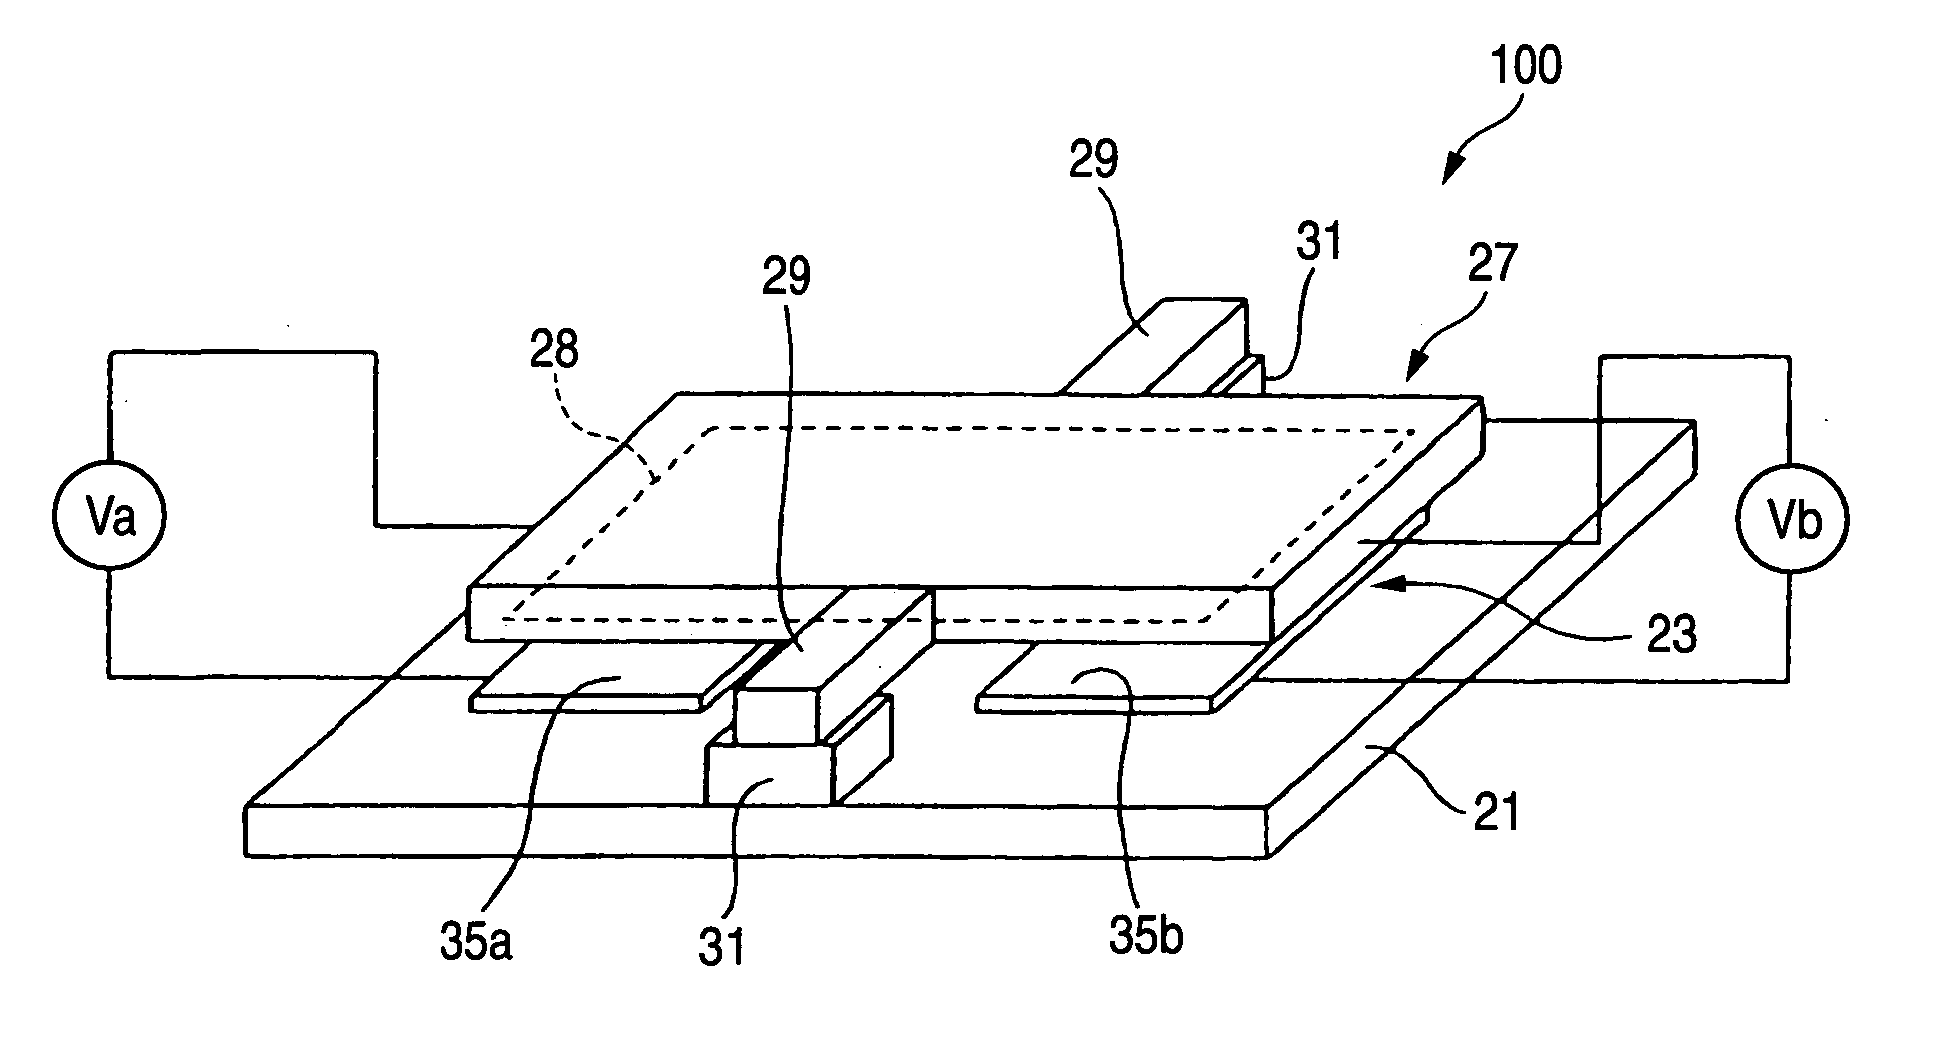 Small thin film movable element, small thin film movable element array and method of driving small thin film movable element array